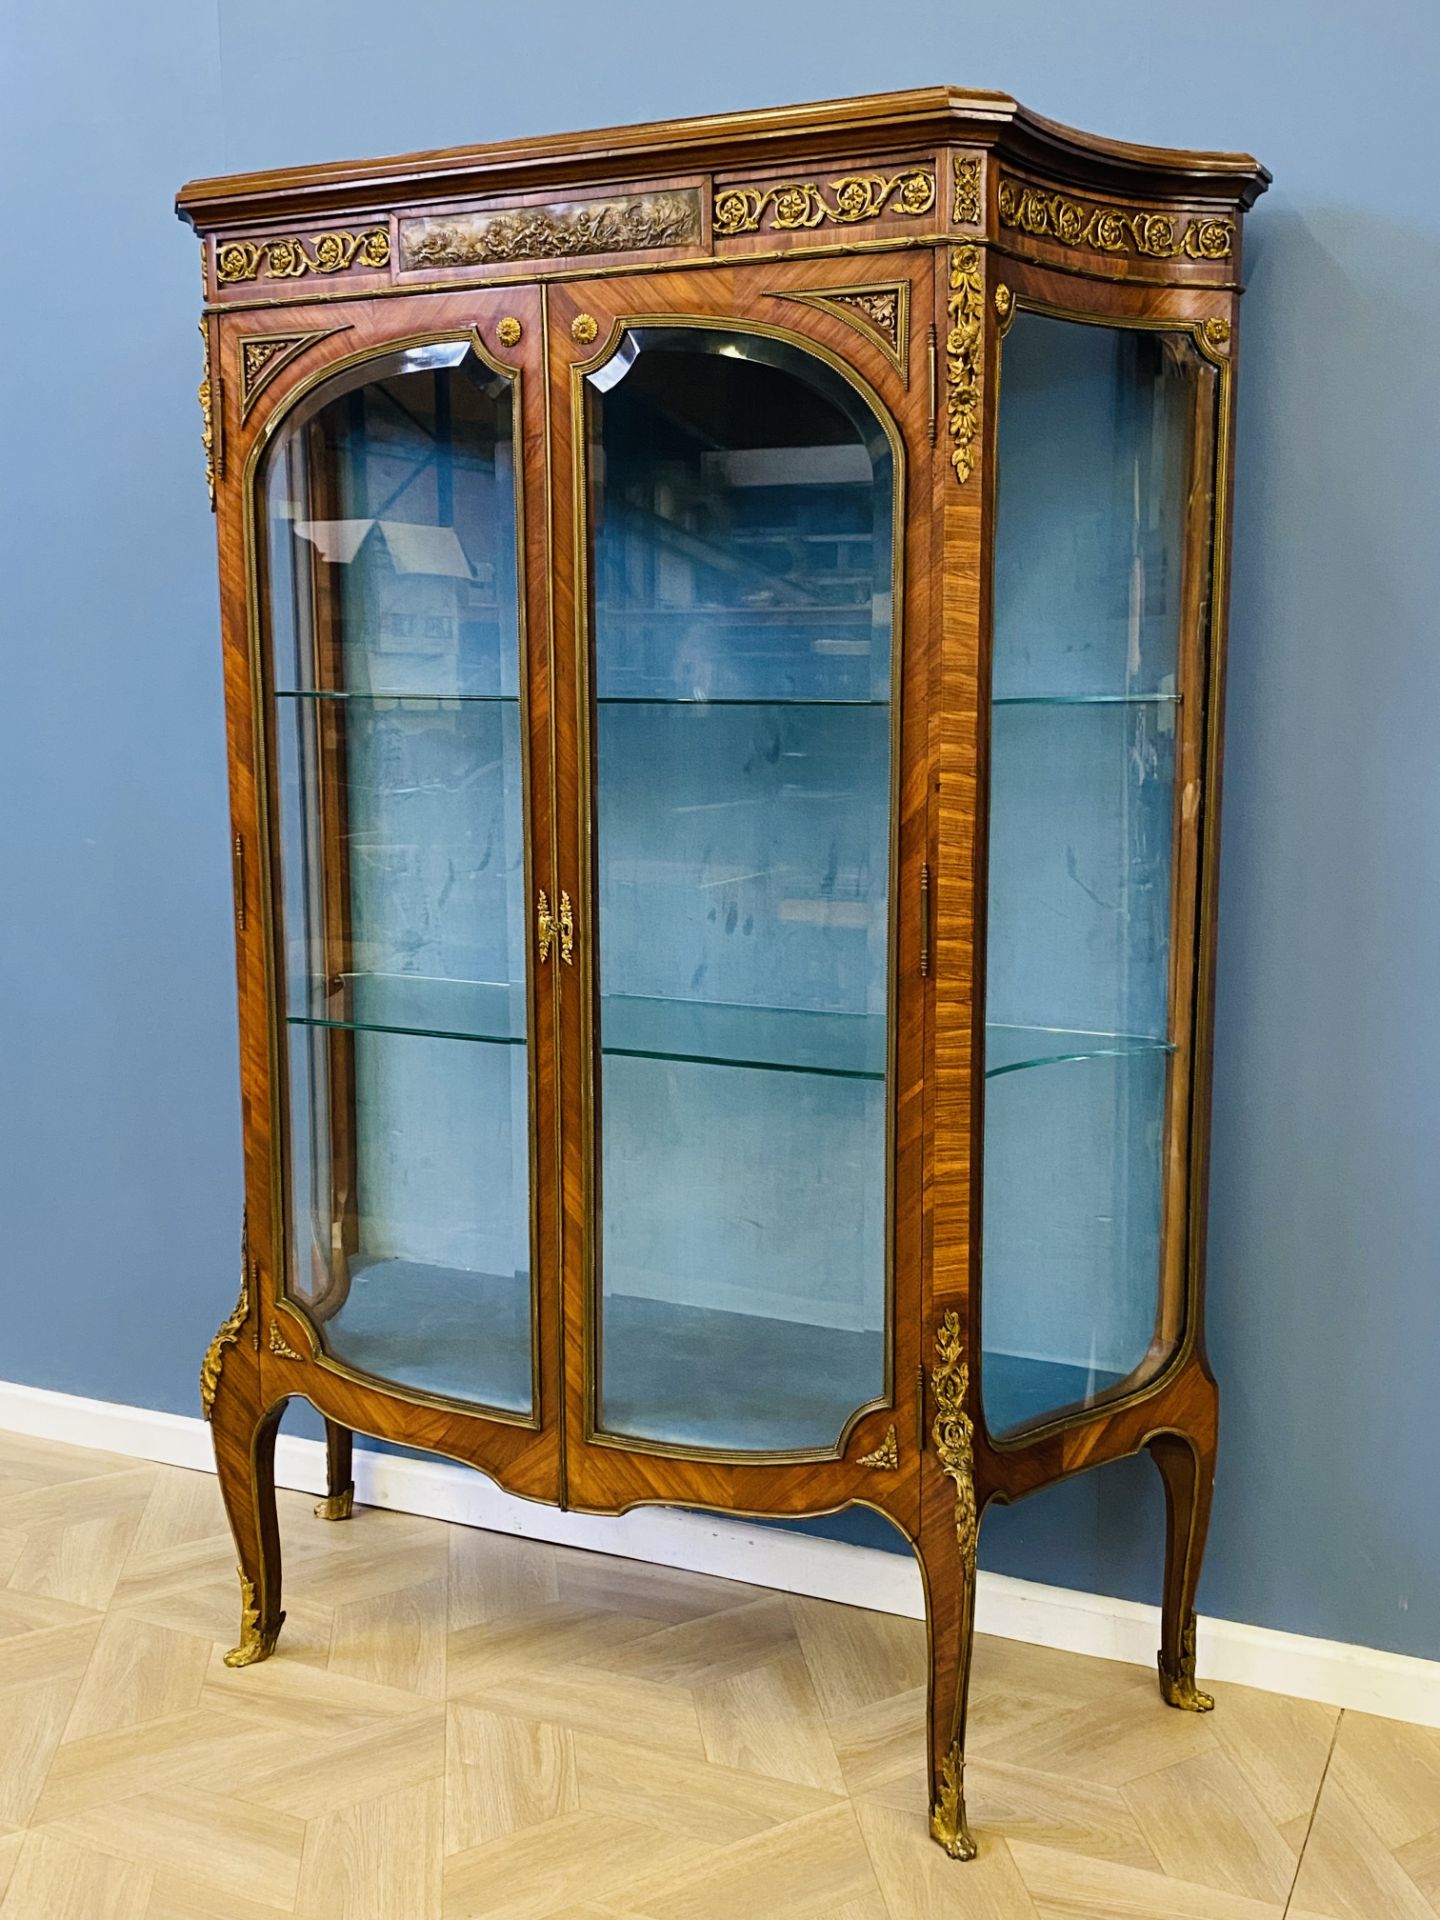 Late 19th century French kingwood and ormolu mounted two door vitrine - Image 7 of 7